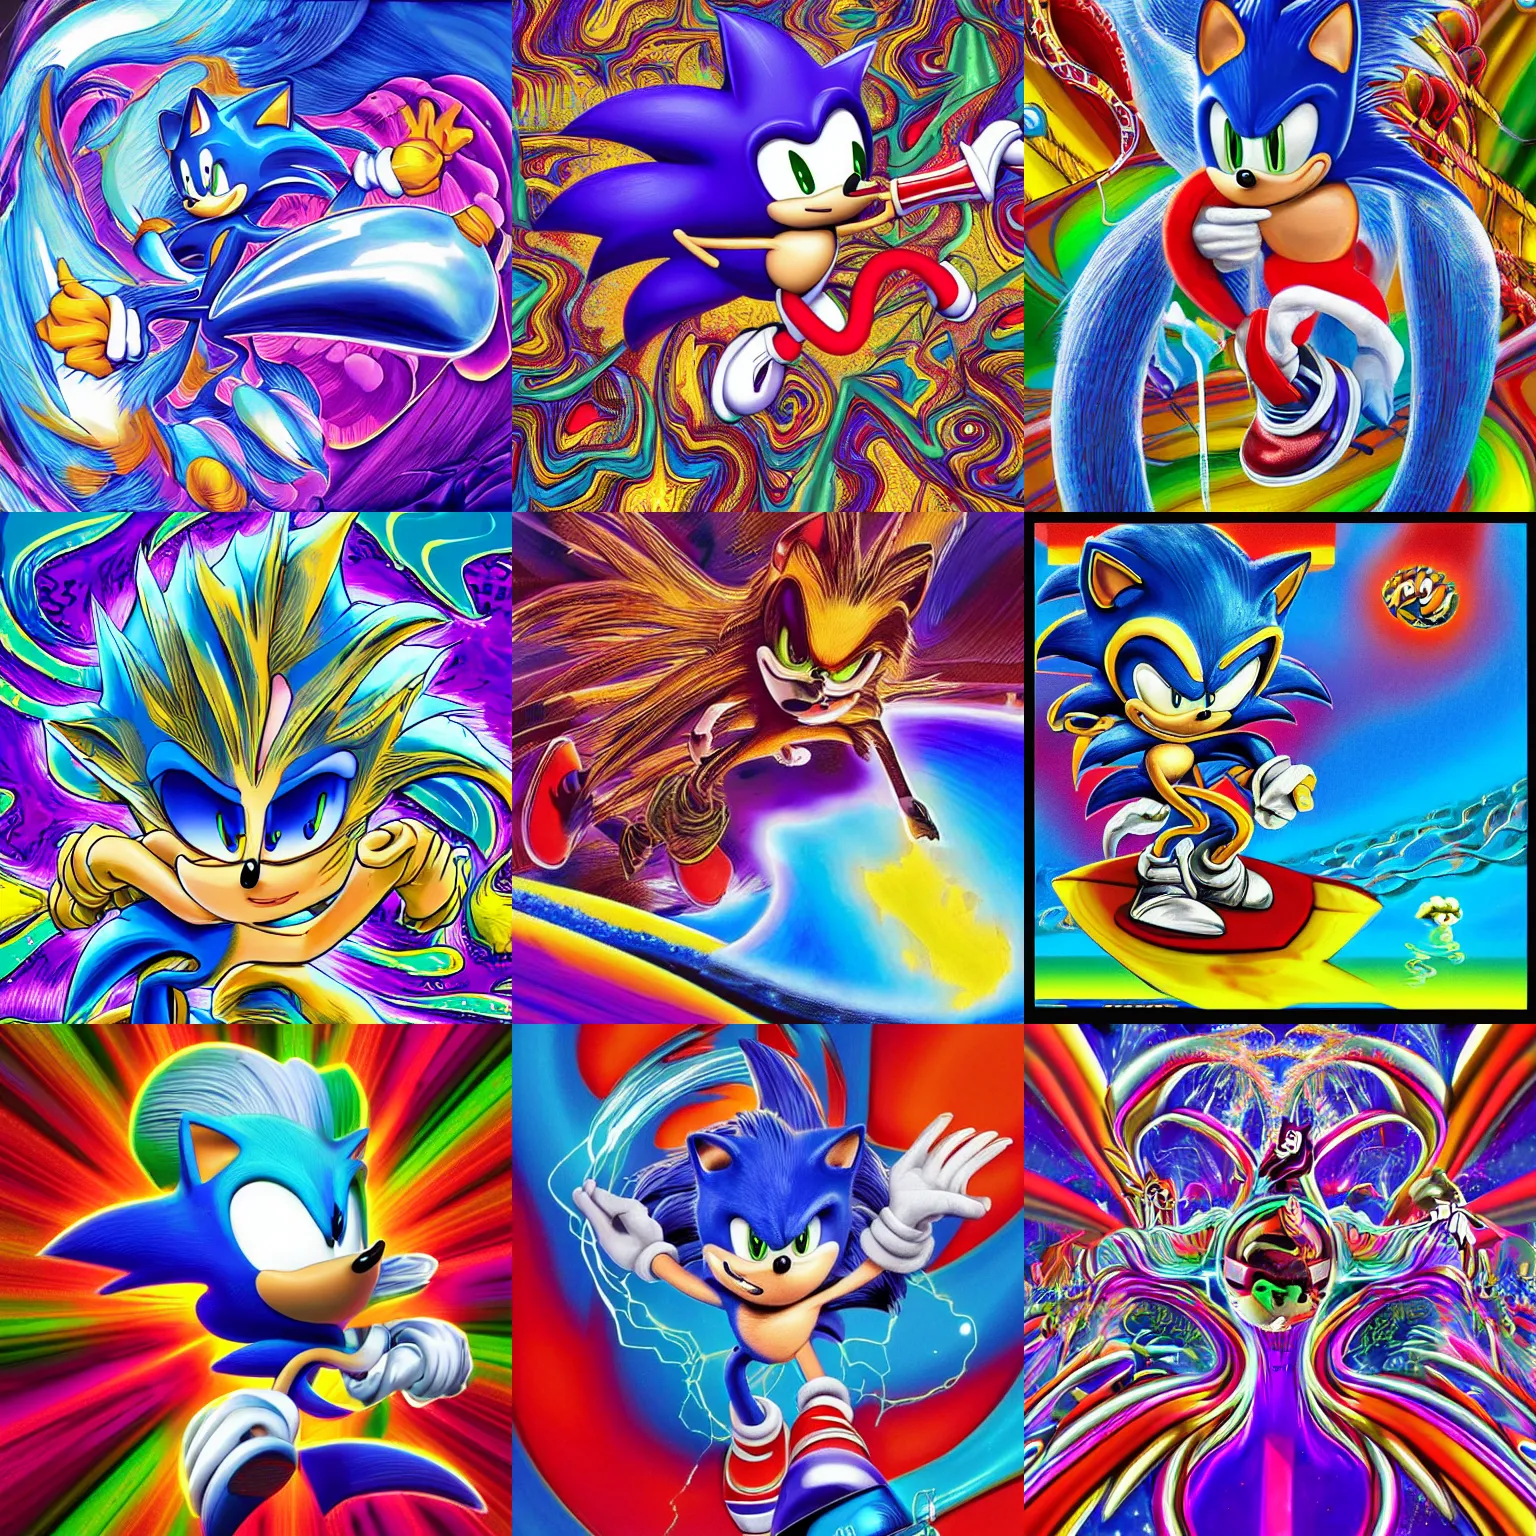 Prompt: classic sonic in surreal, fractal, detailed professional, high quality portrait airbrush art MGMT album cover portrait of a liquid dissolving LSD DMT sonic the hedgehog surfing through cyberspace, purple checkerboard background, 1990s 1992 Sega Genesis video game album cover